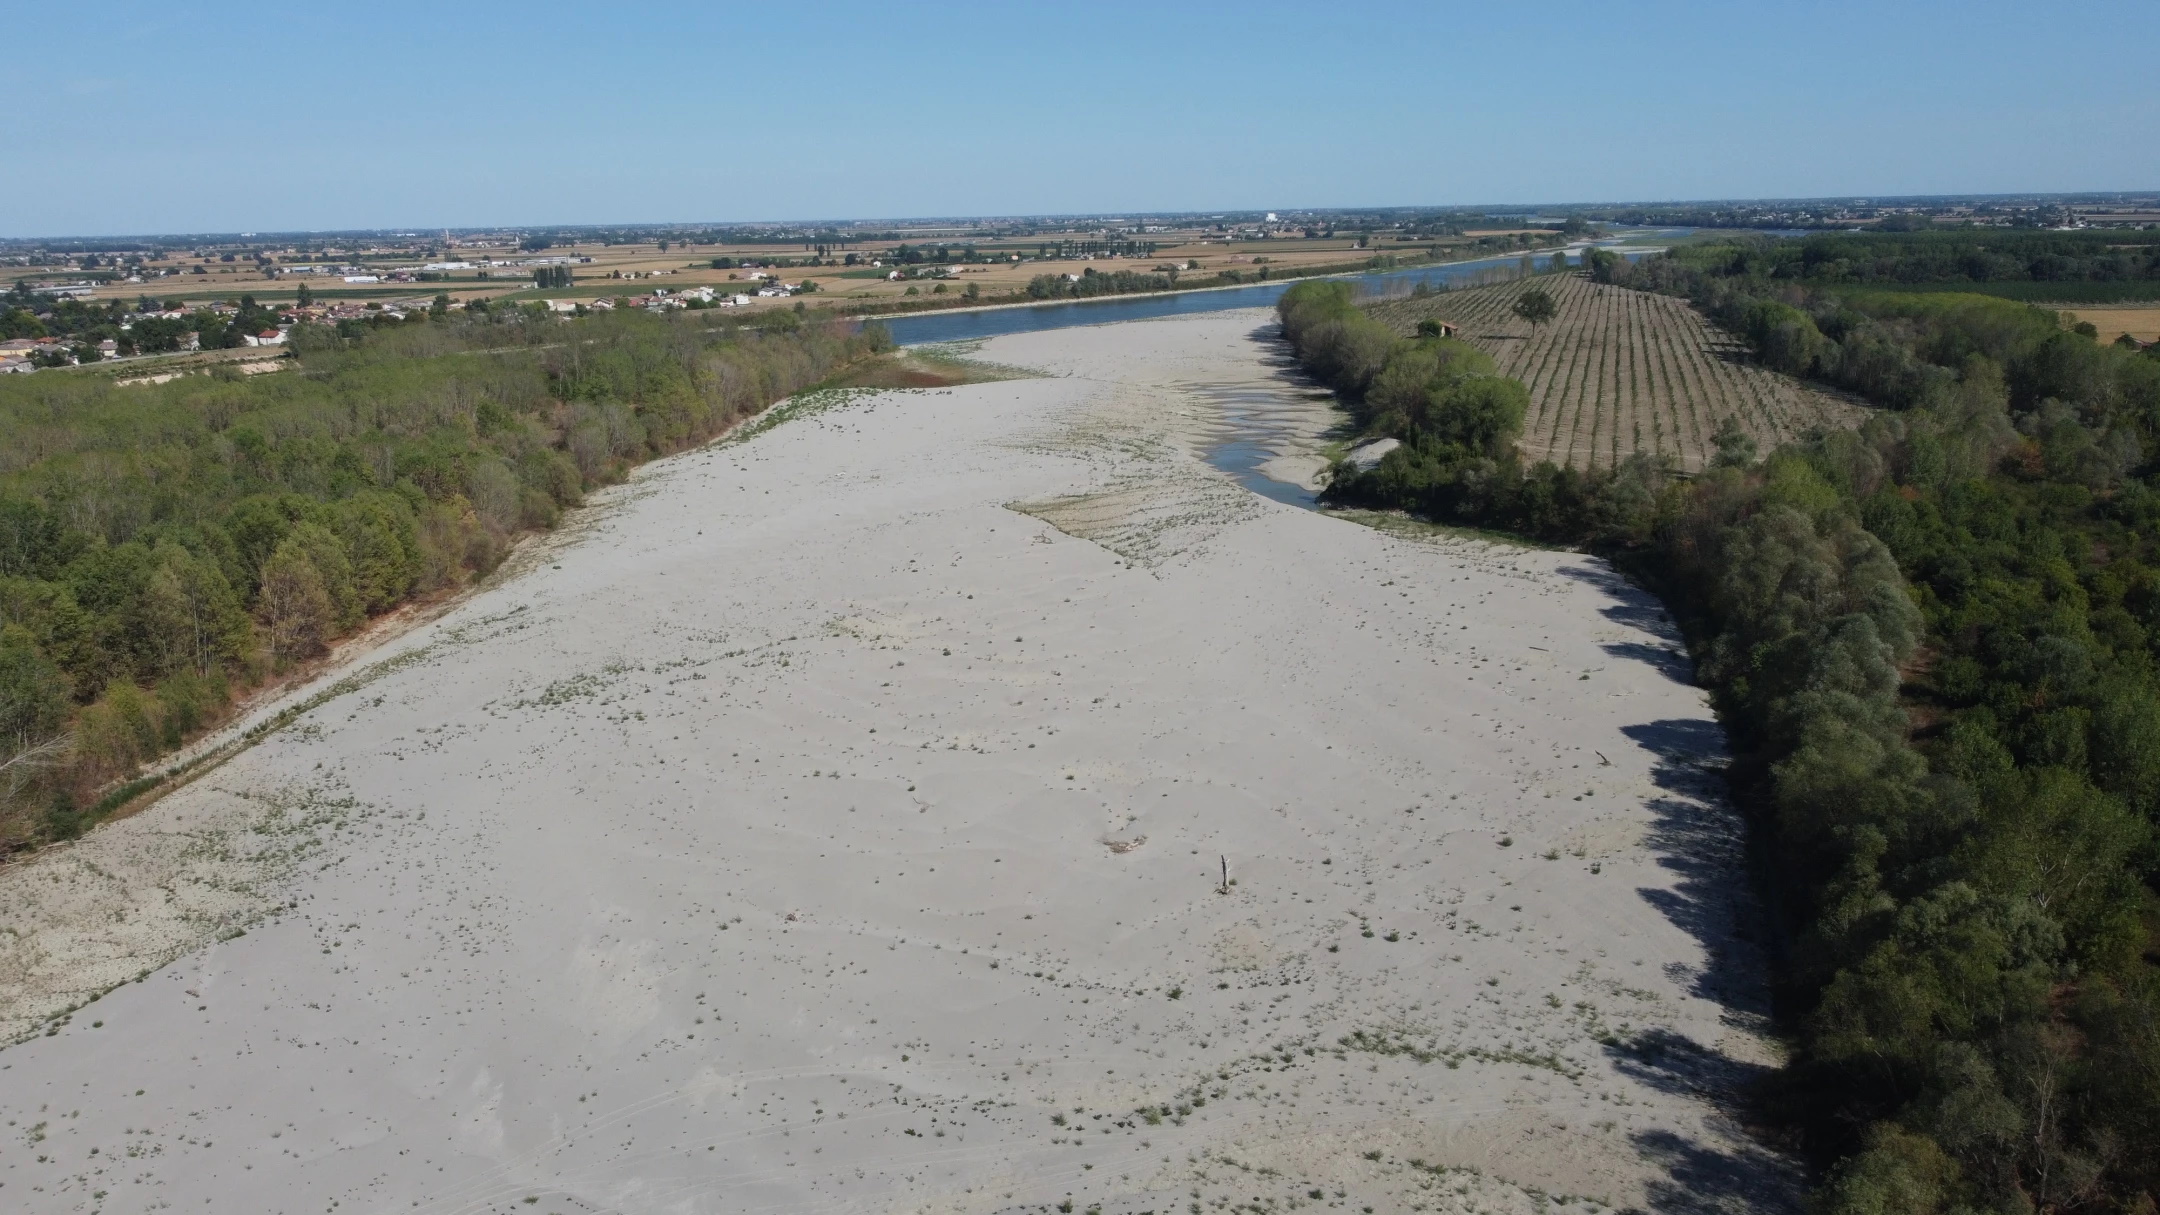 The dried riverbed of the Po on 11 August 2022 in Sermide, Italy. Photo: Luigi Navarra / Associated Press